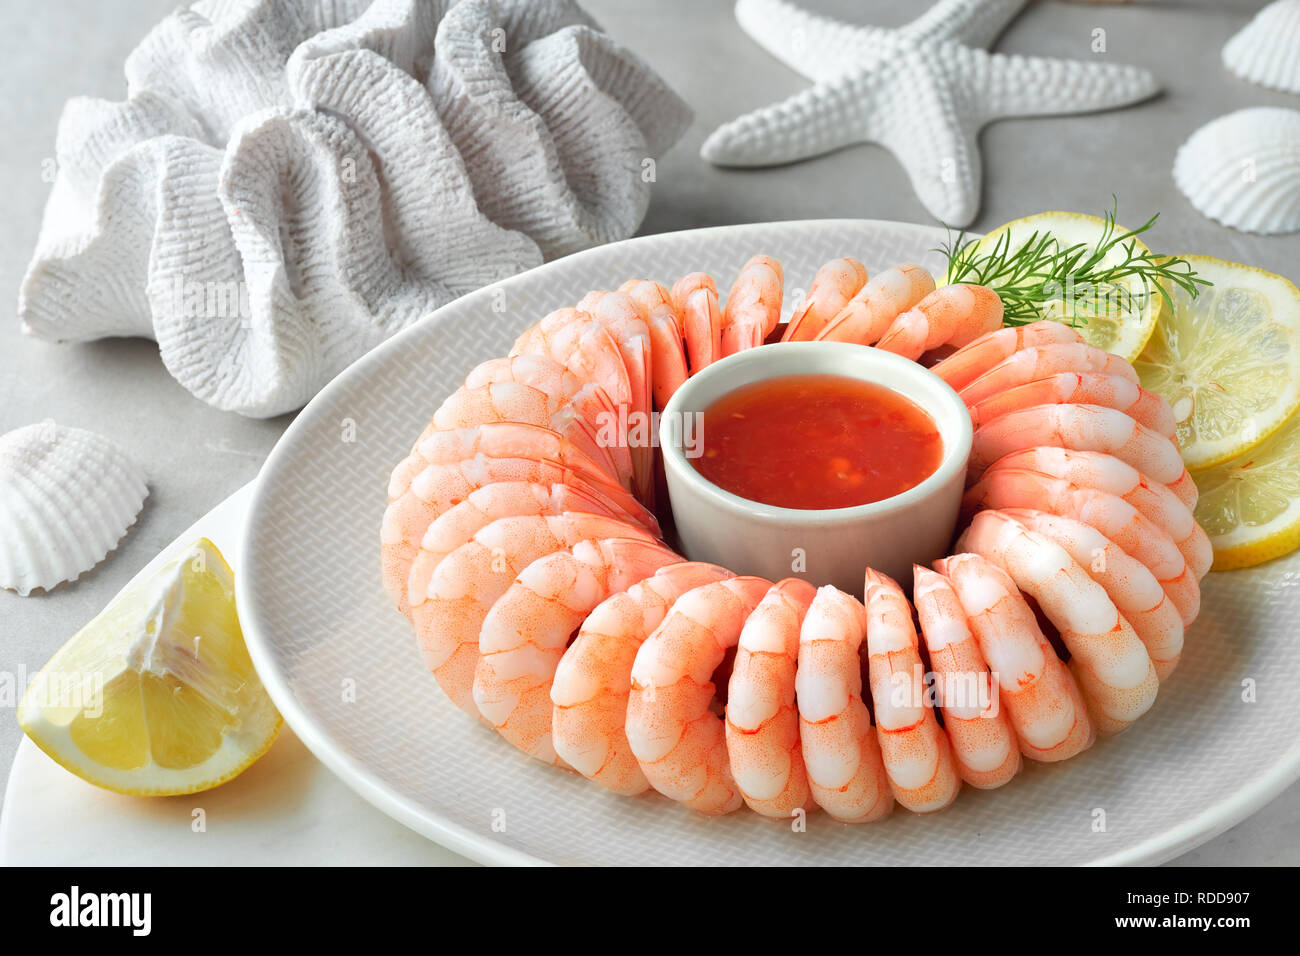 Close-up on shrimp ring with sweet chili sause, dill and  lemon on light background with white sea decorations Stock Photo